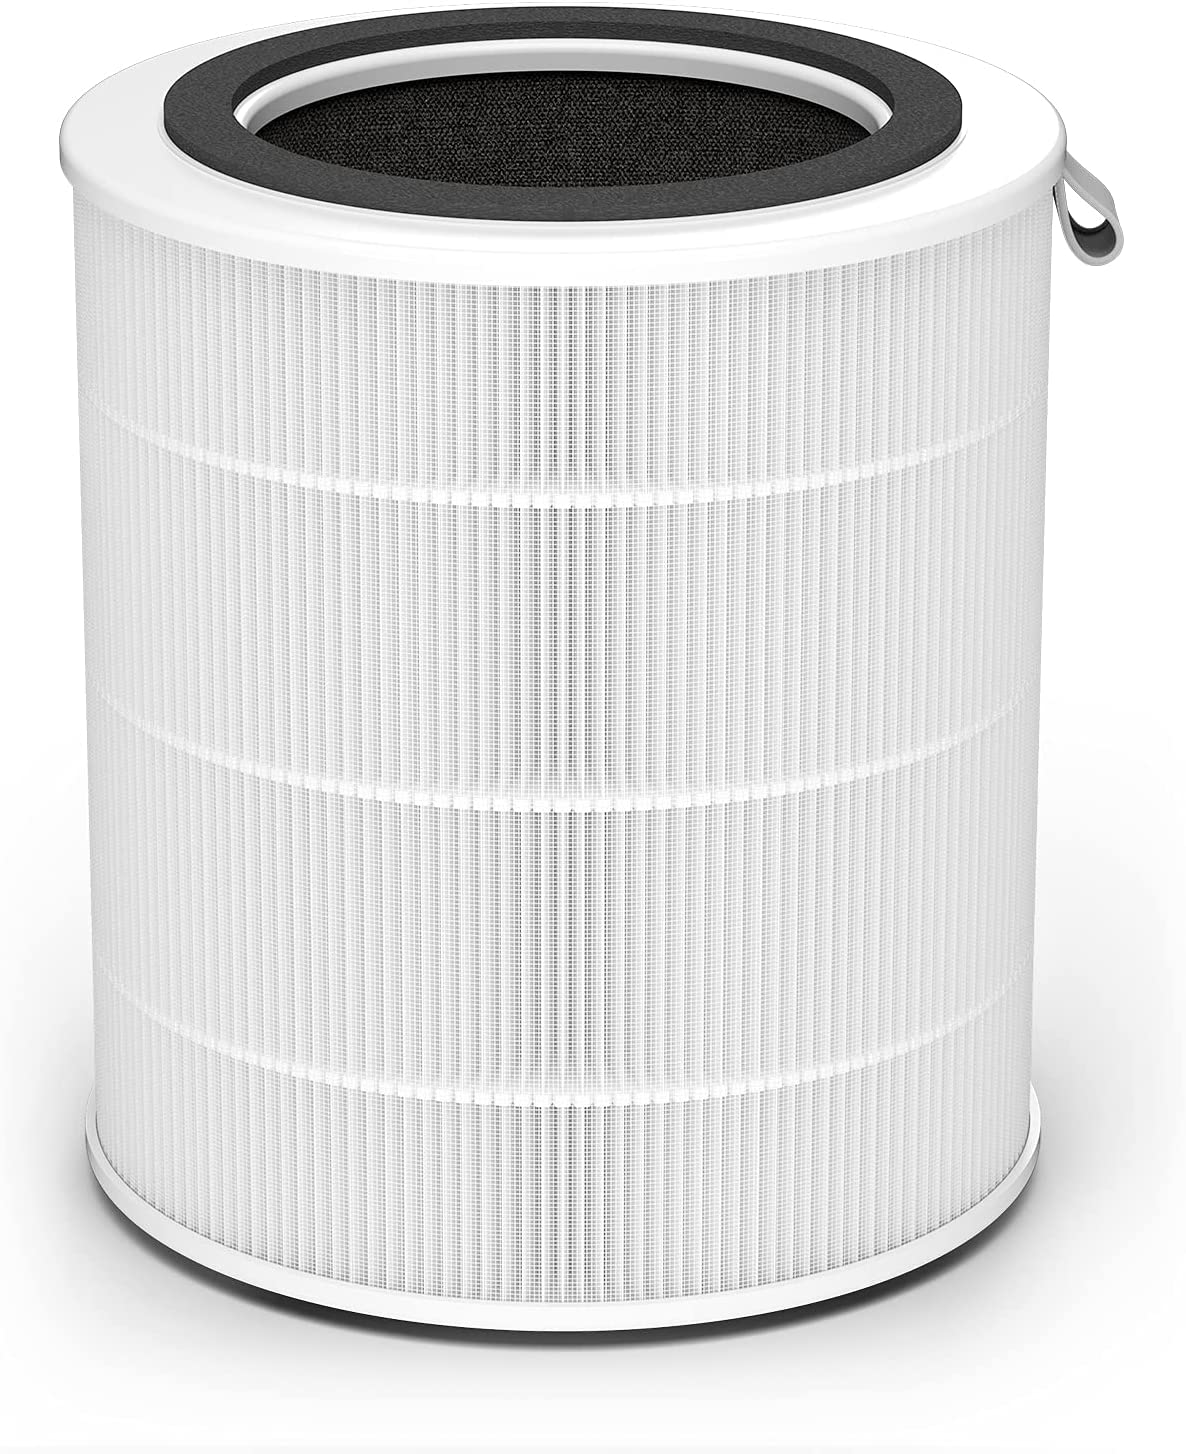 TCL - Breeva A2ACC1 breeva A2 Air Purifier Replacement Filter, True HEPA H13 and Activated Carbon Filter, Remove 99.97% Dust Pollen Pet Dander, Lasts for 90 Days or 3 Months Equivalent to 2,160 Hours, 1 Pack - White